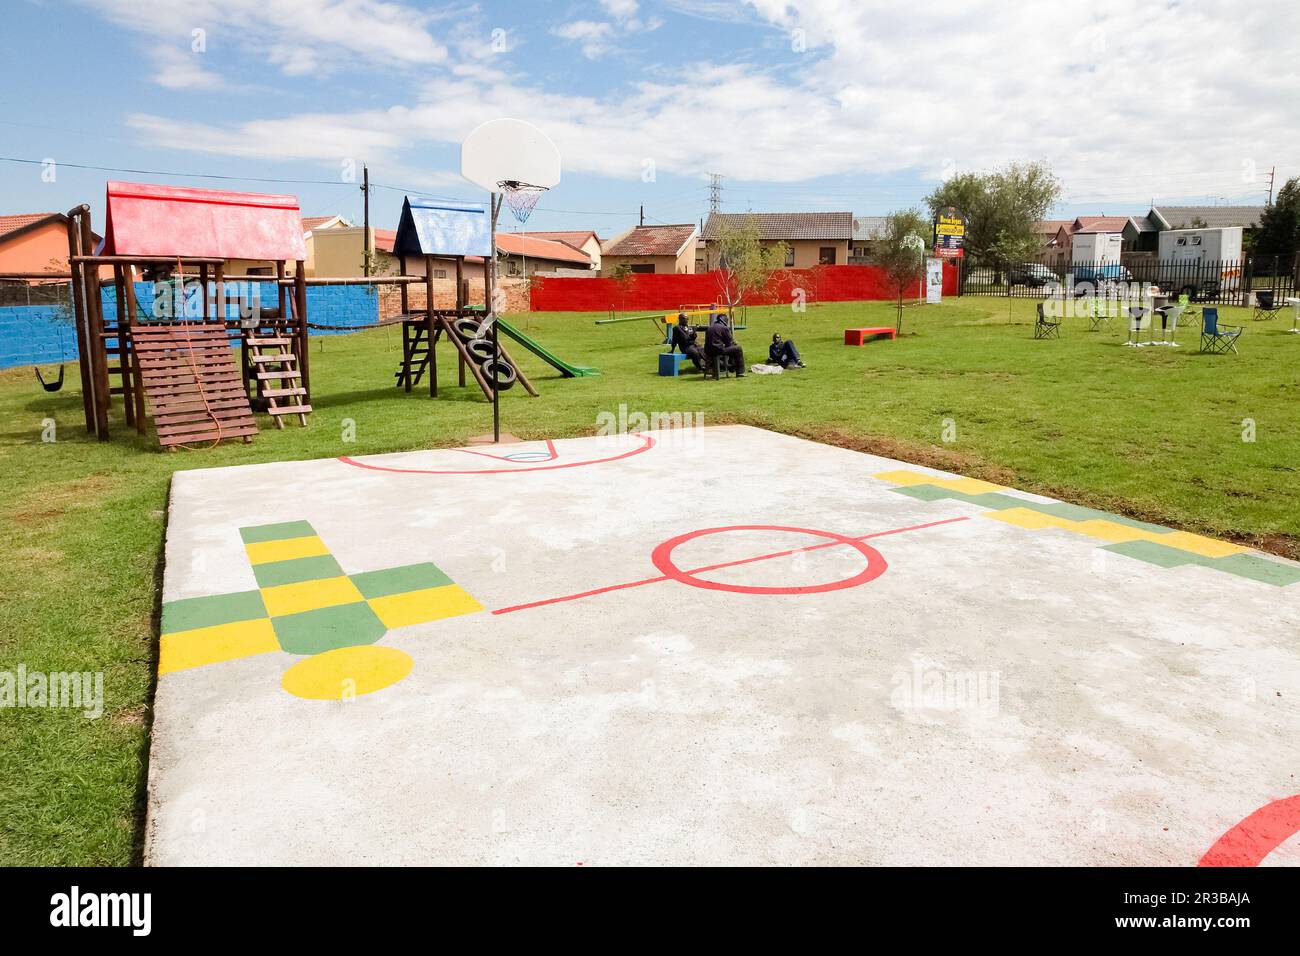 Basketball court and other park equipment at local public playground Stock Photo